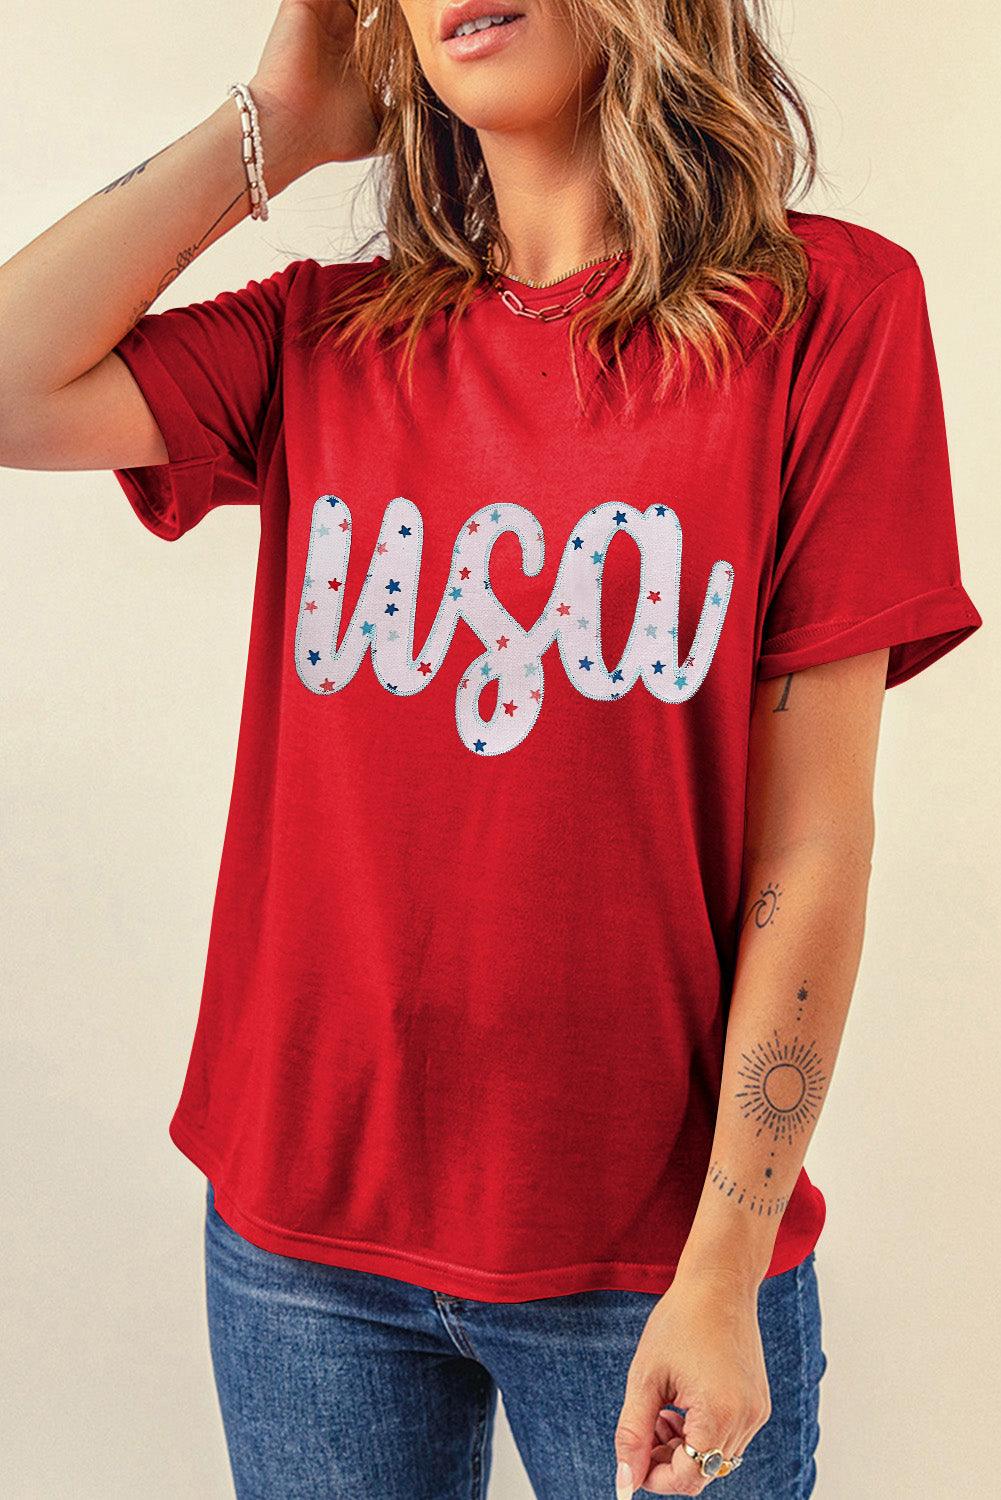 Red Starry usa Graphic Crewneck T Shirt